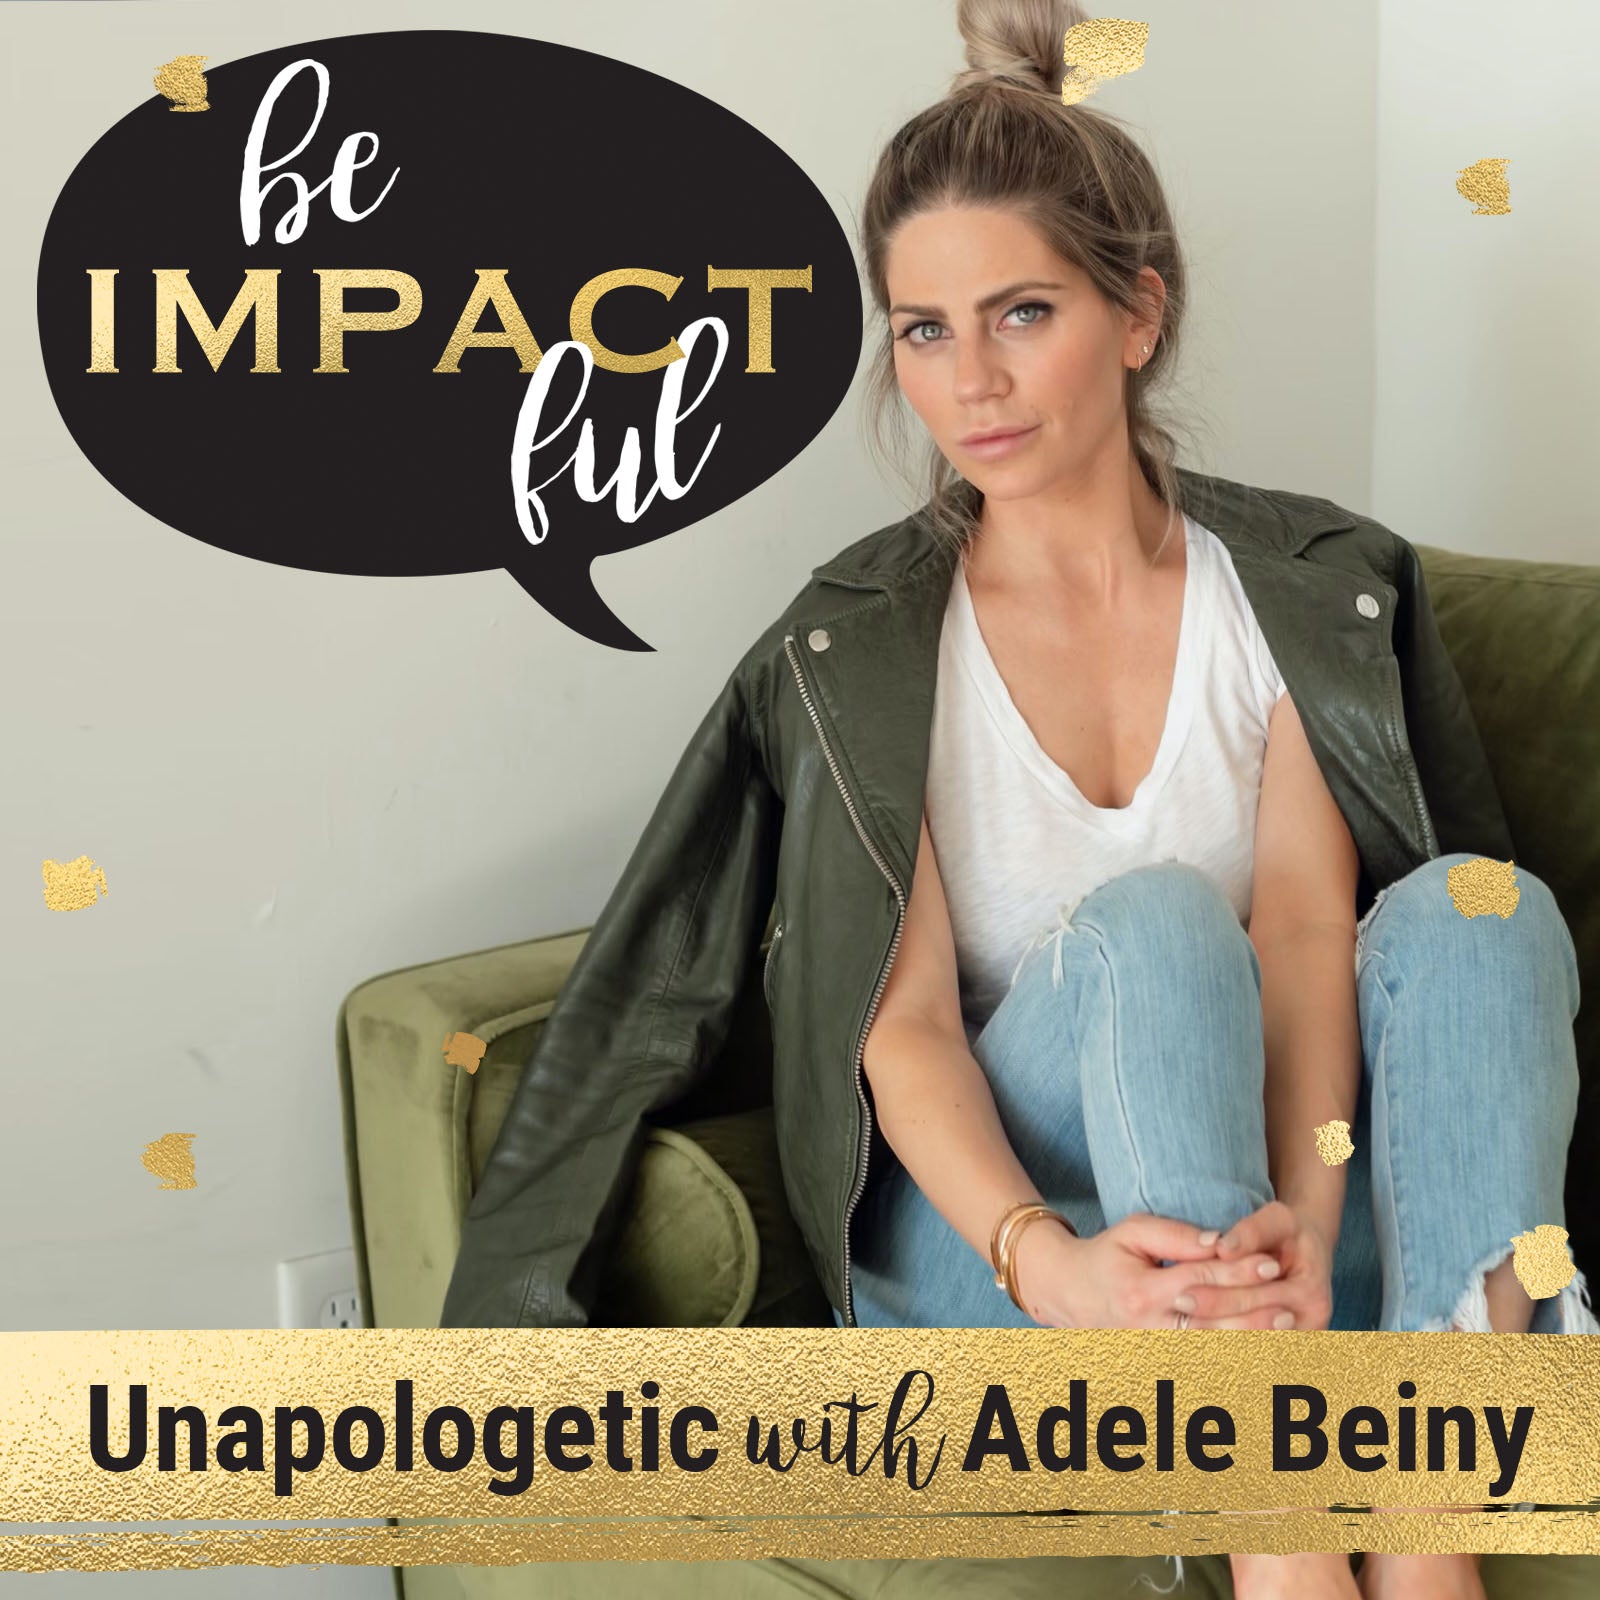 Unapologetic with Adele Beiny